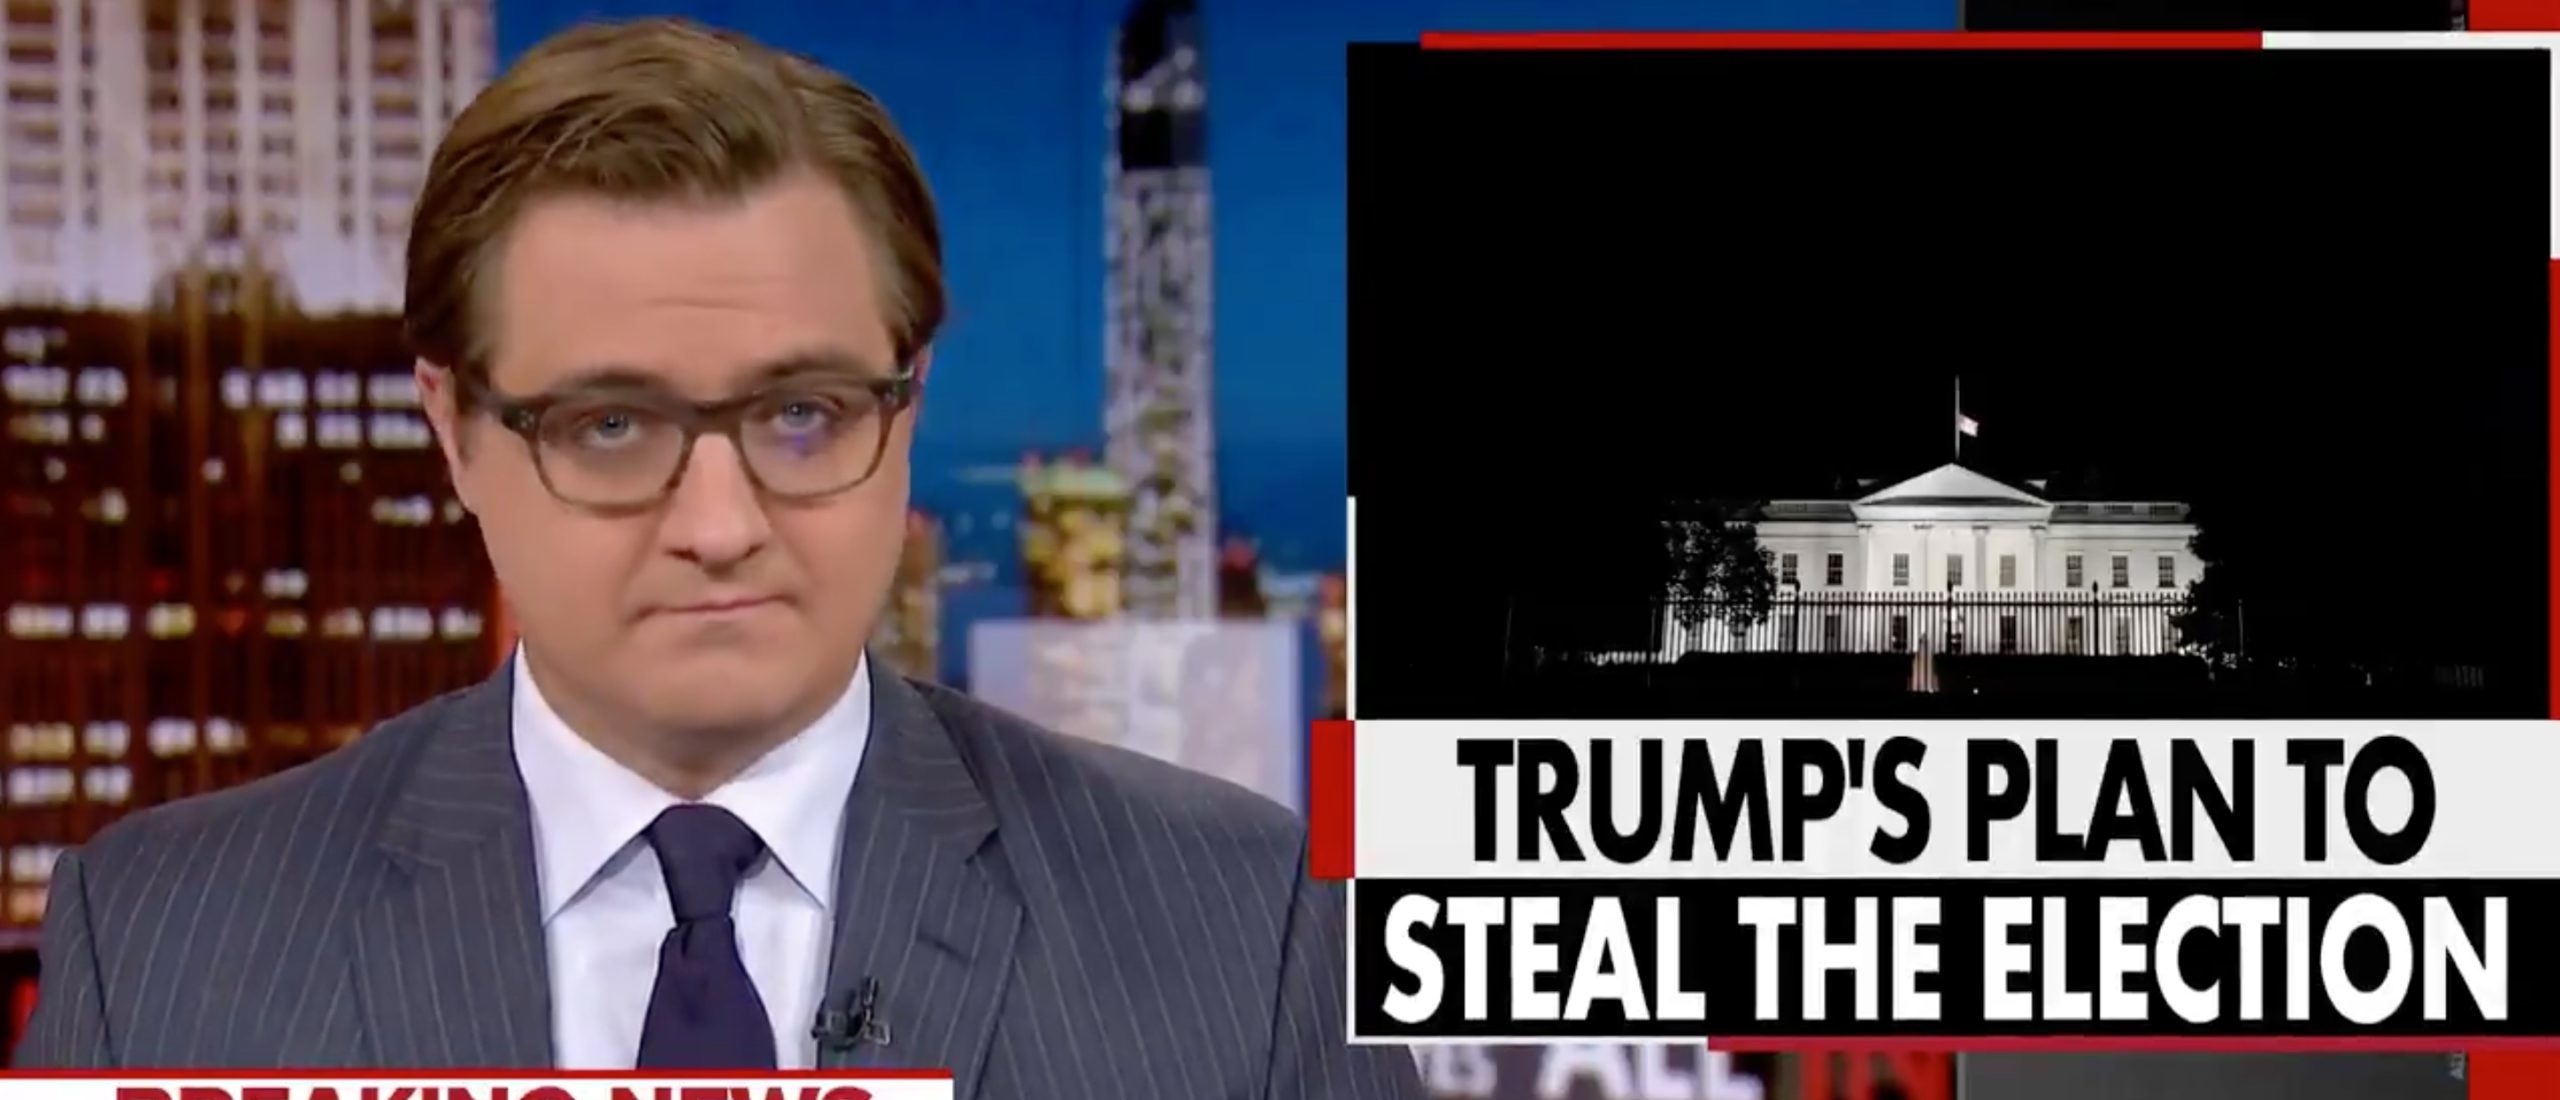 MSNBC Host Chris Hayes Says Trump Supporters Are ‘Colluding With Evil